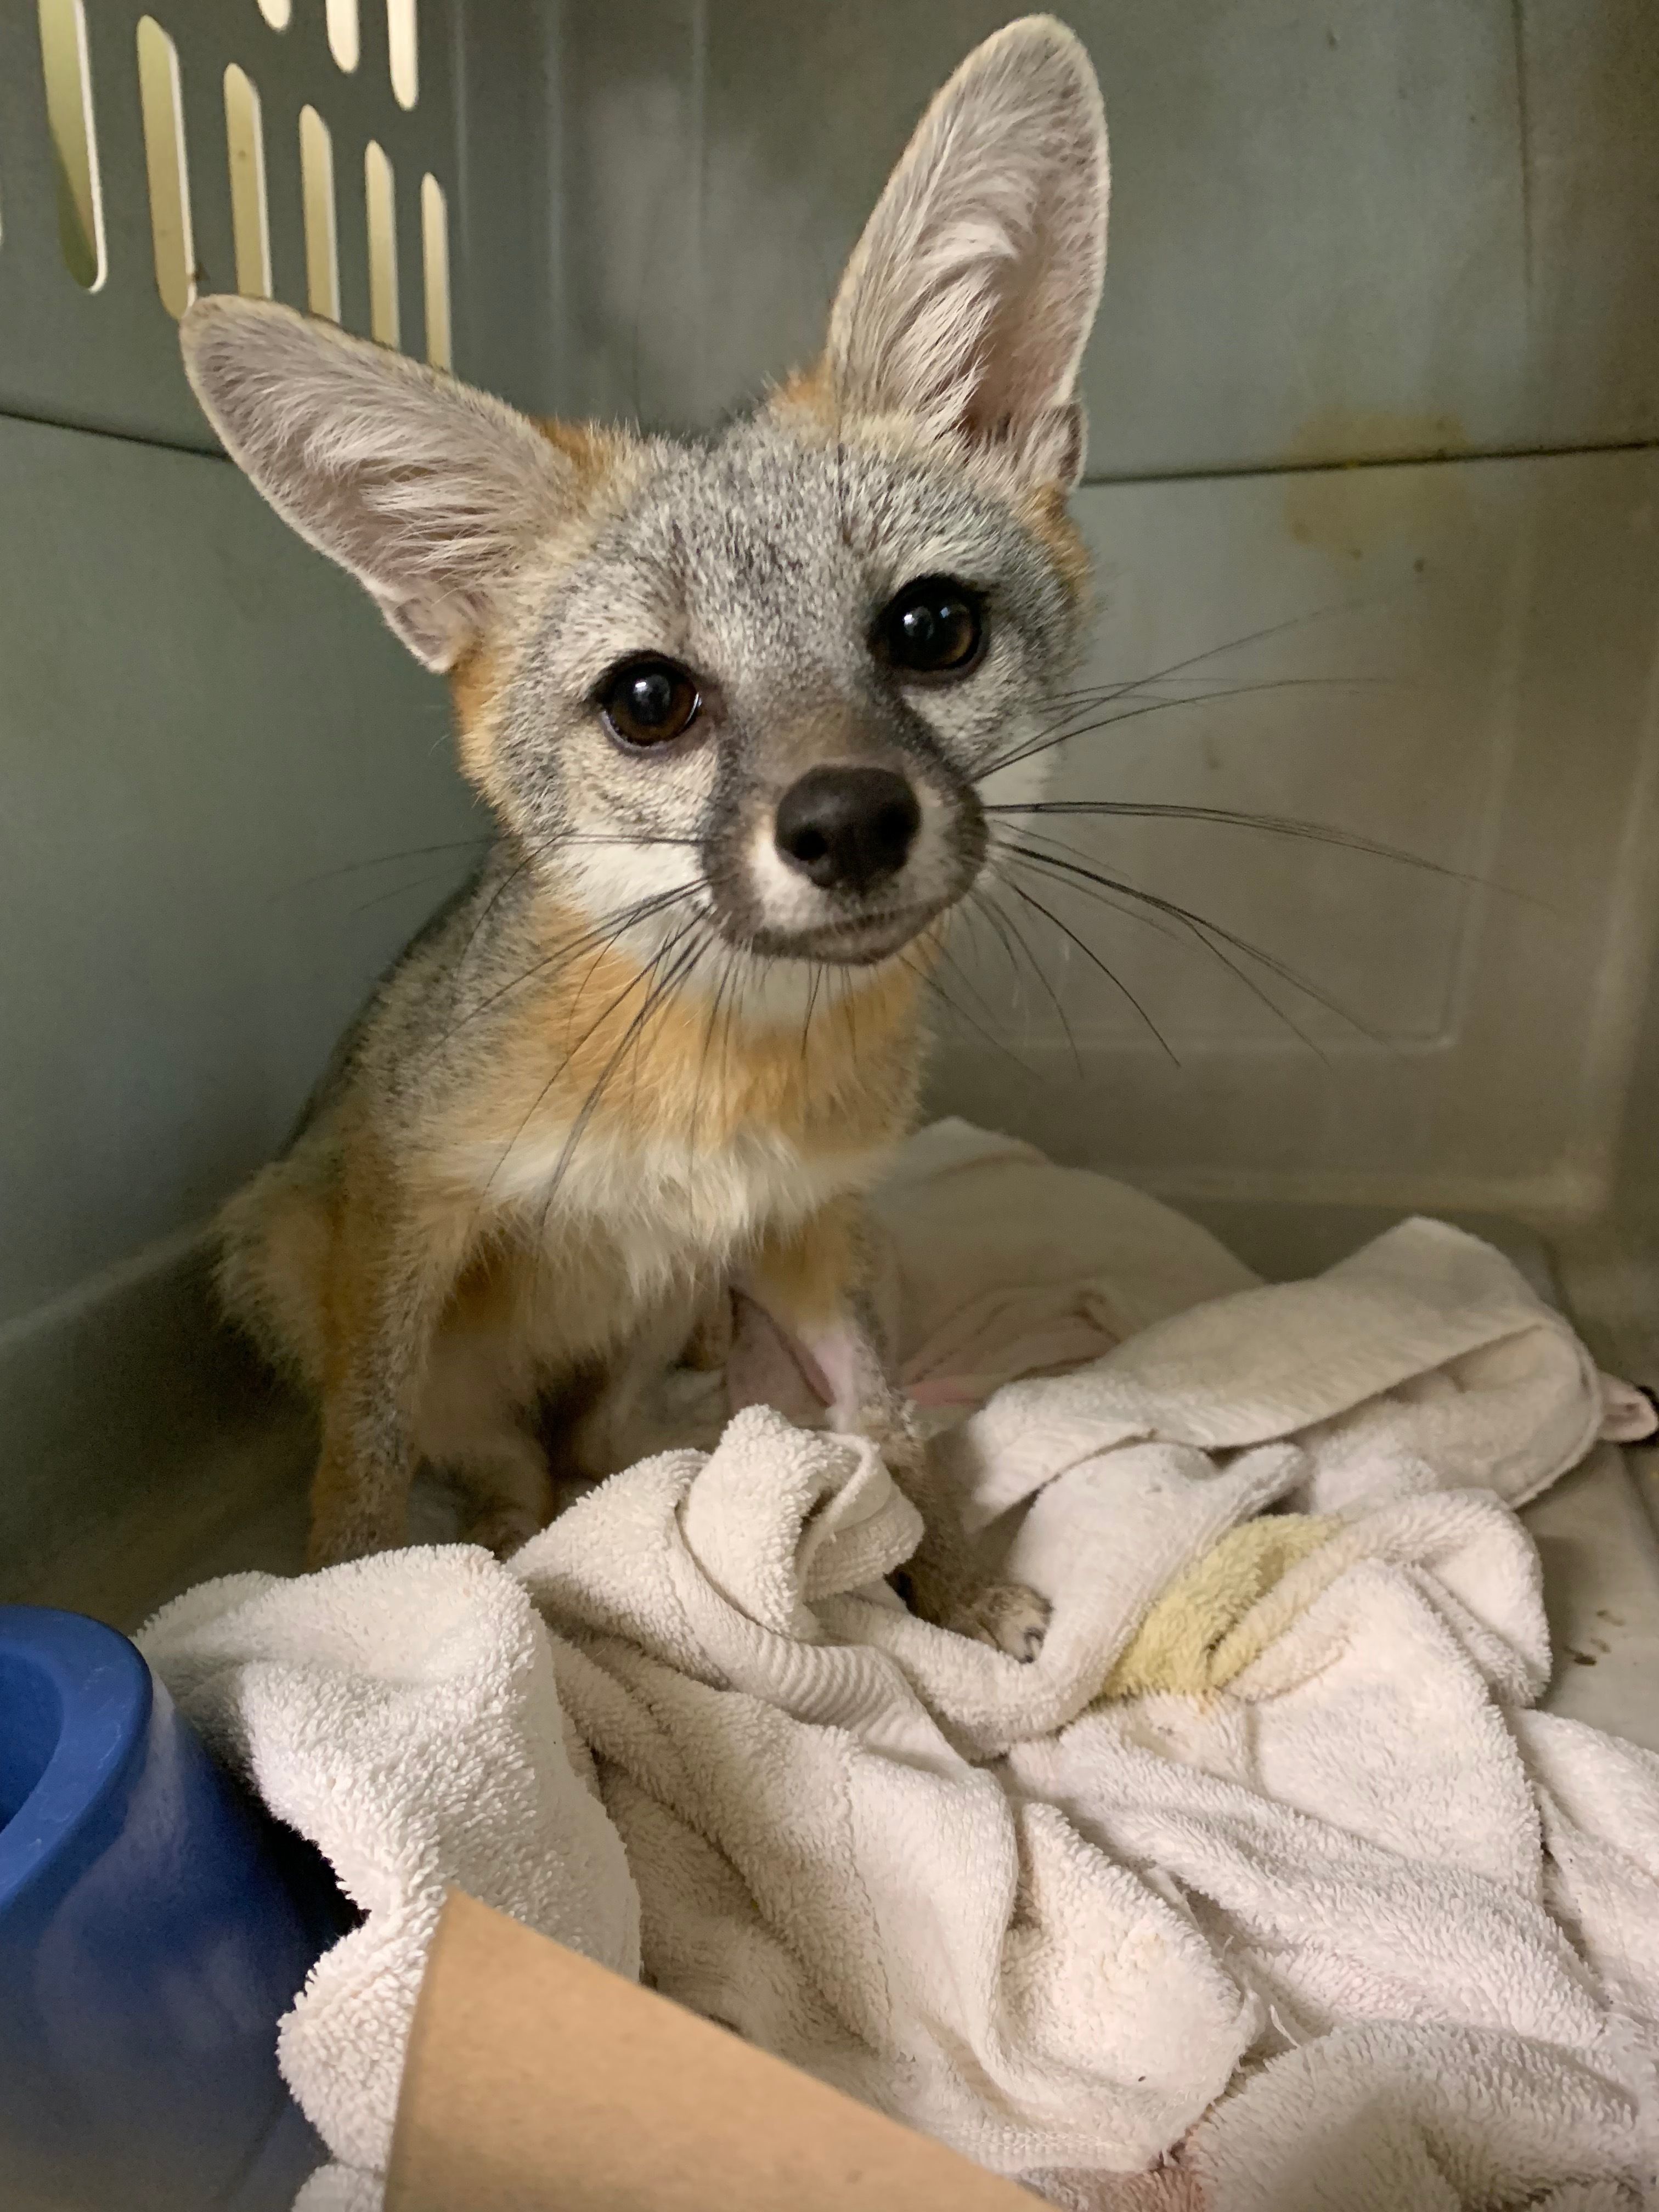 A gray fox looks curiously but cautiously at the camera, snuggled in towels in his clinic enclosure.